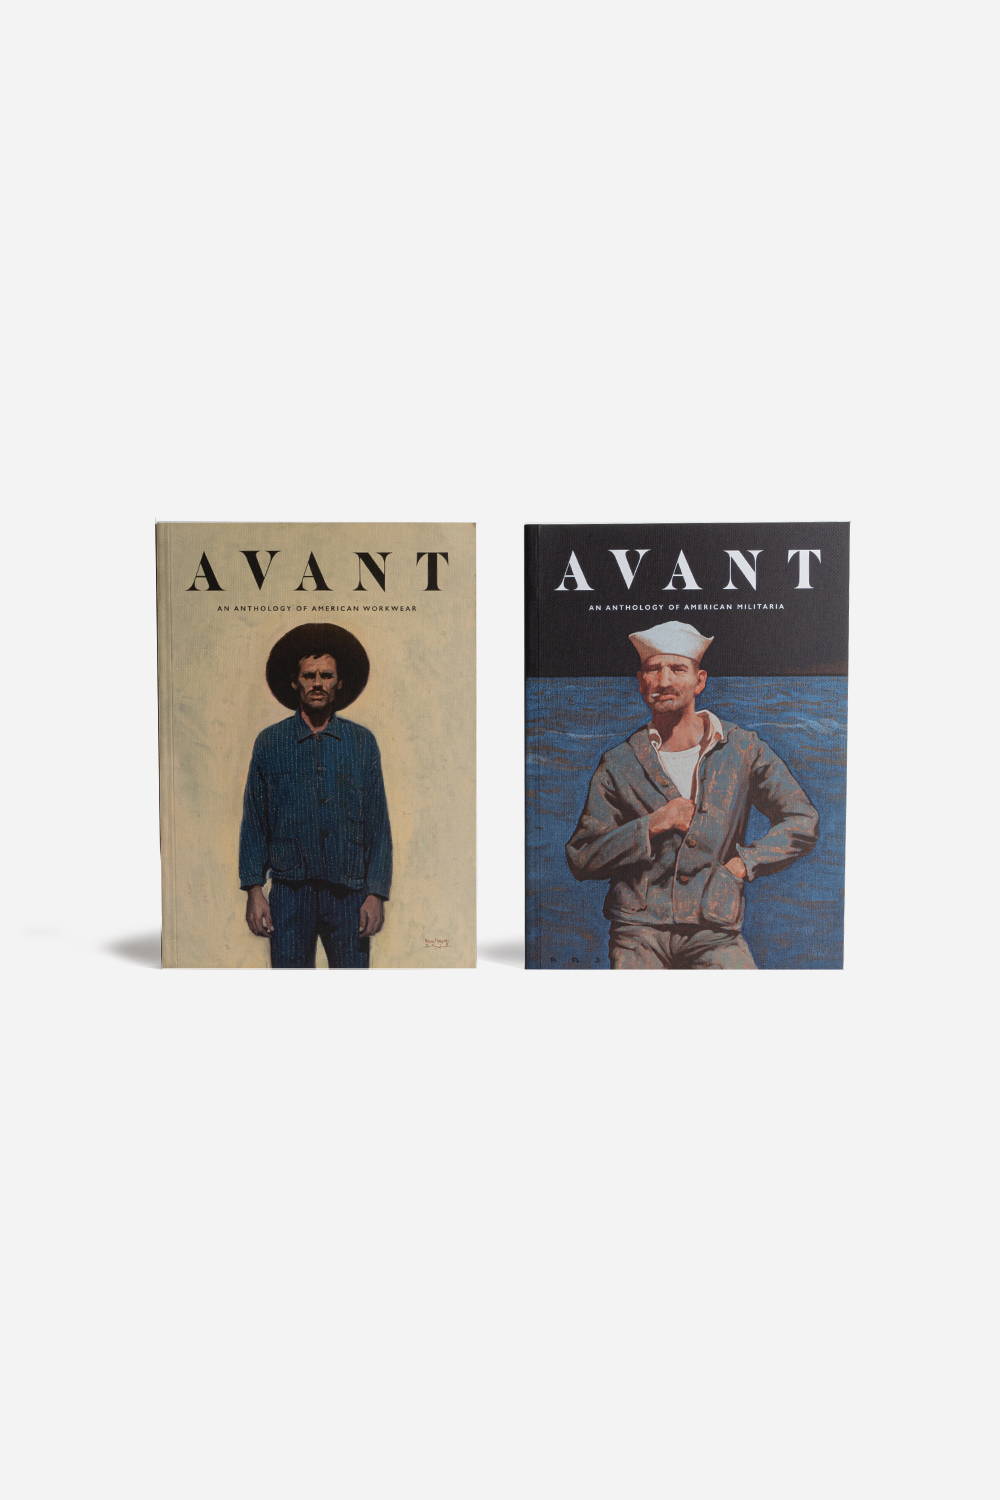 Introduction to: AVANT MAG